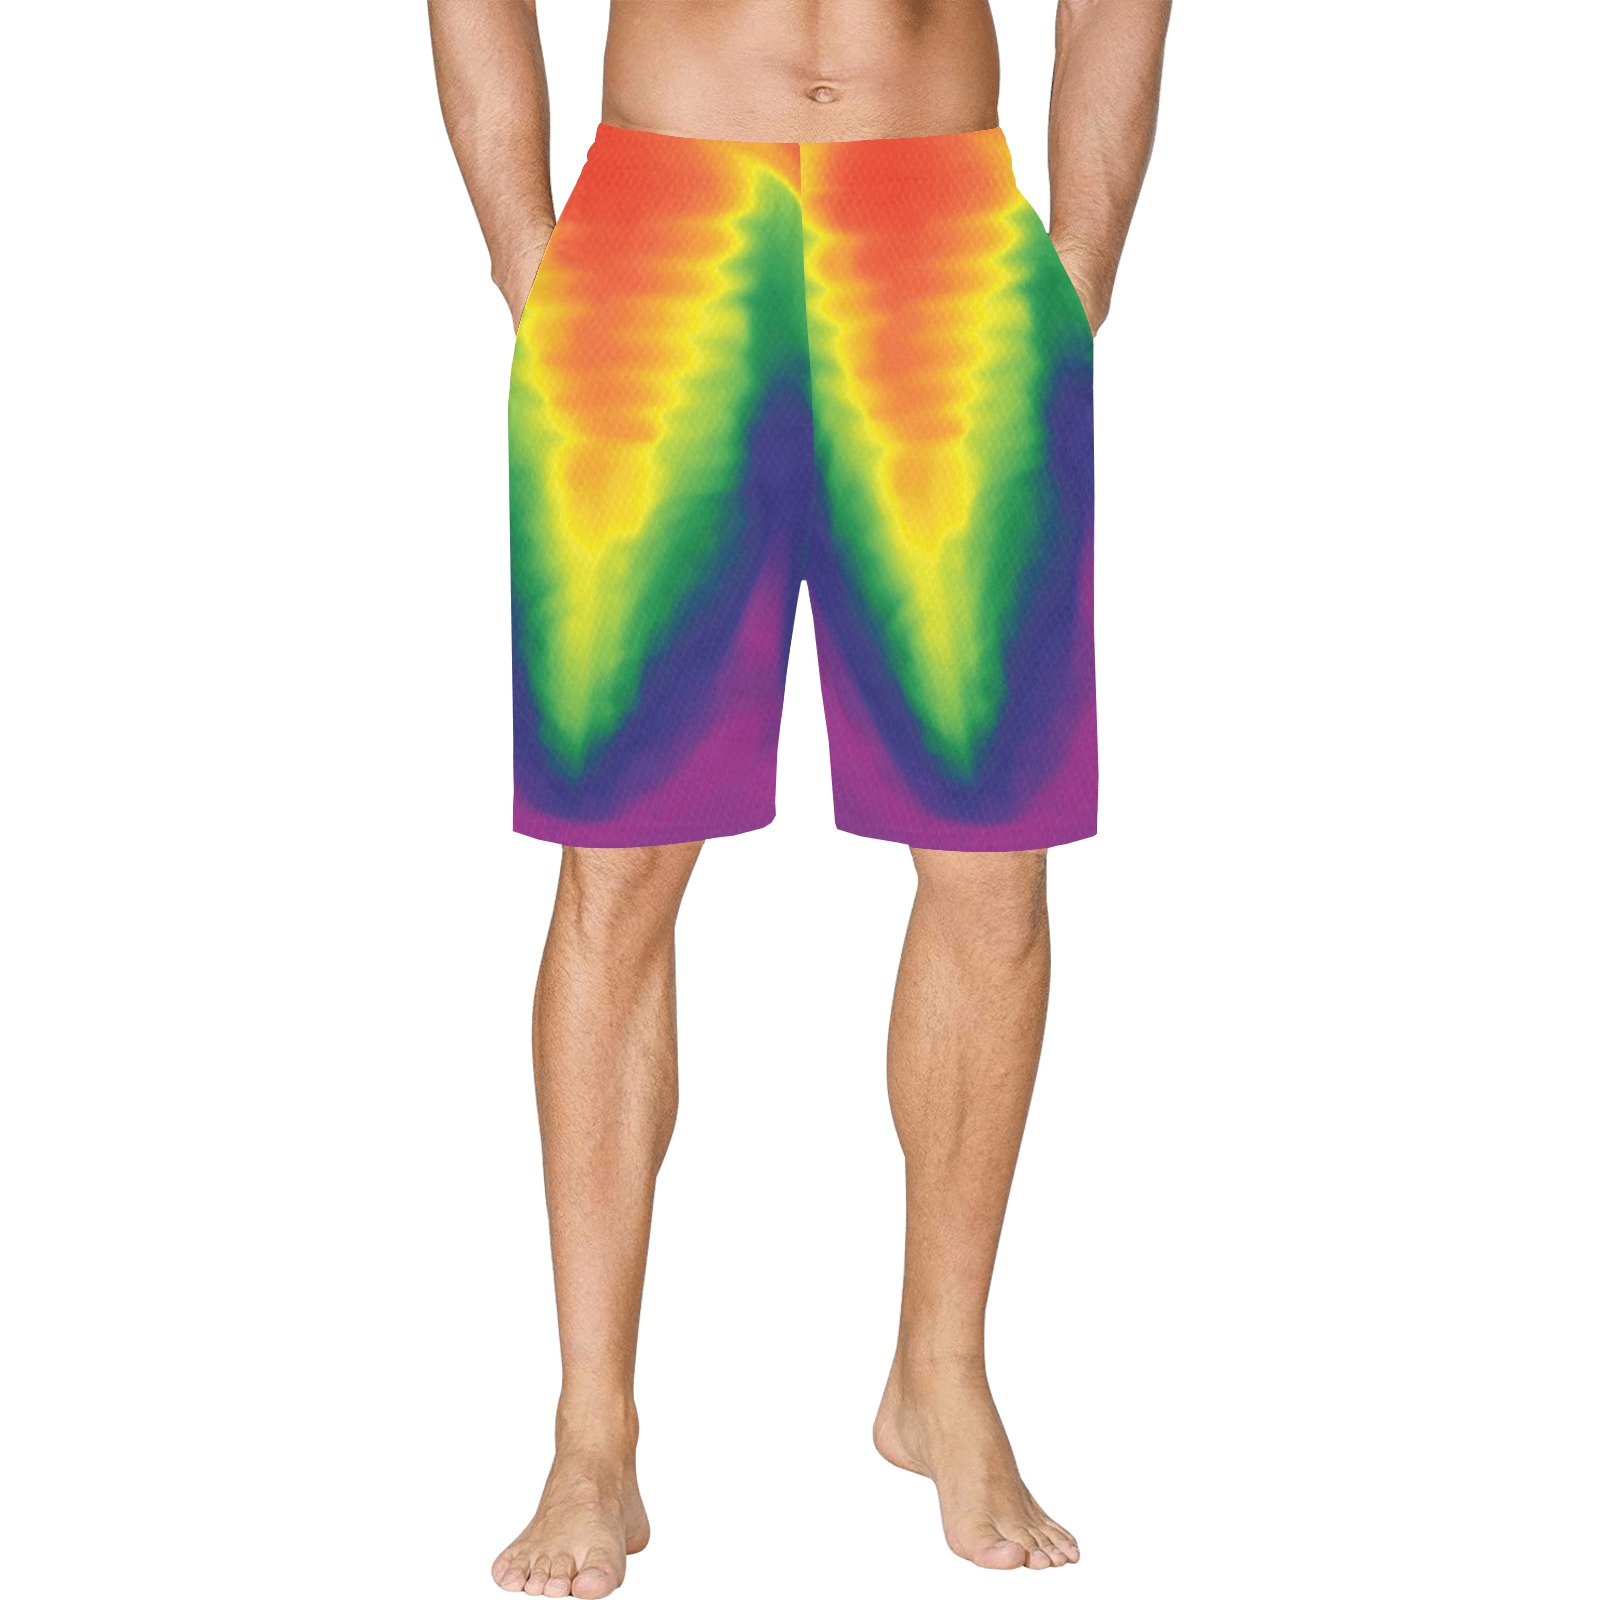 Refactor rainbow All Over Print Basketball Shorts with Pocket